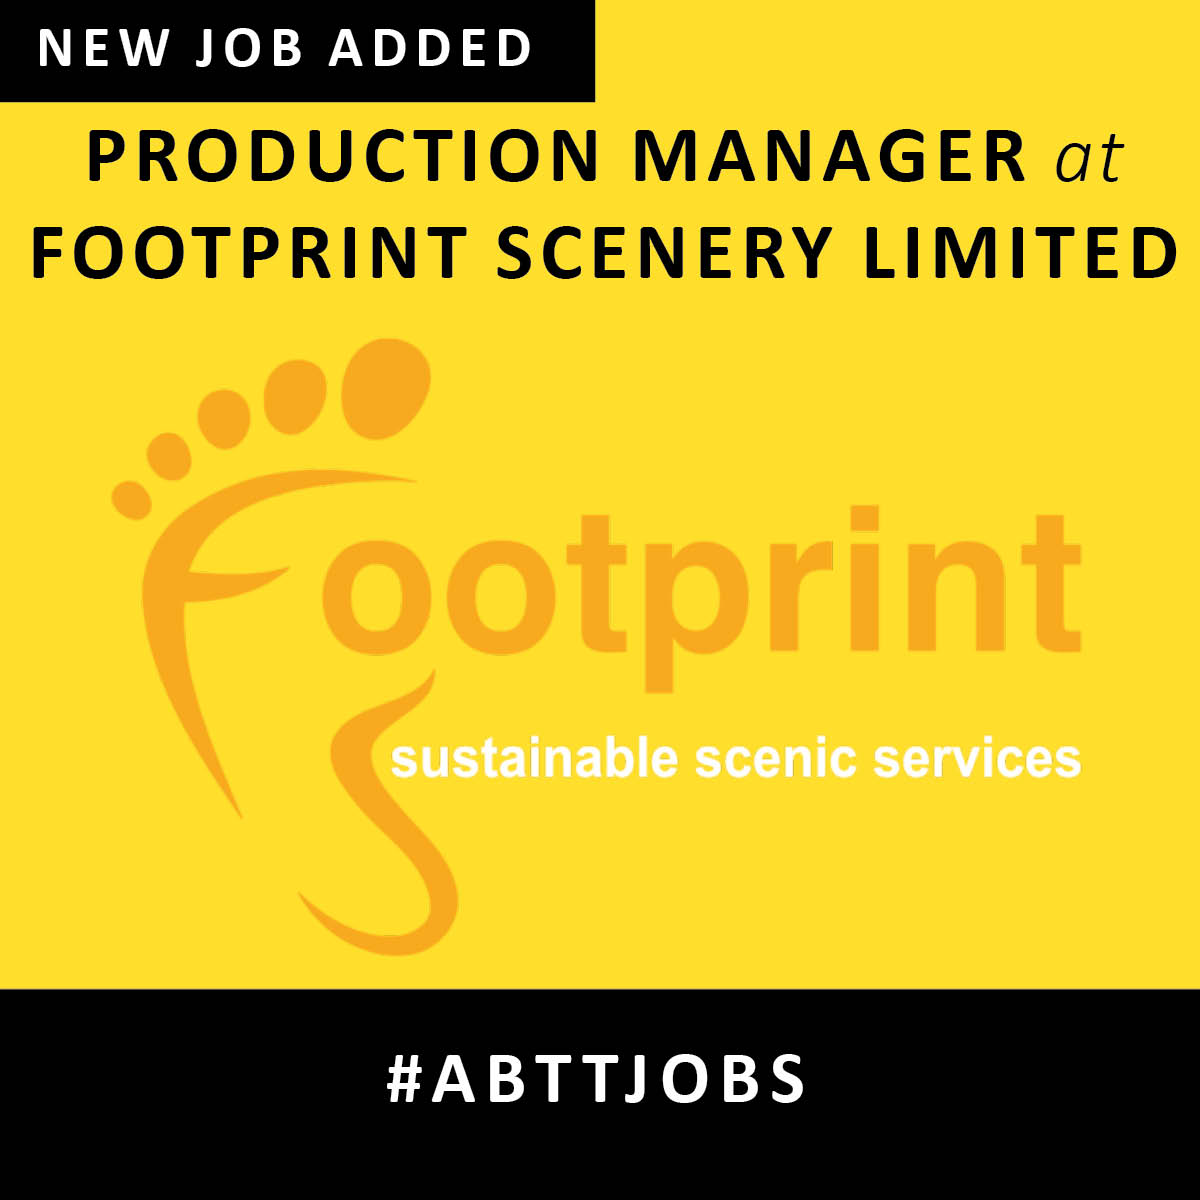 Footprint Scenery Limited are looking for a Production Manager of all scenery construction and prop making projects in their workshop and on site when required with a strong focus on sustainability. Find out more and apply here: abtt.org.uk/jobs/productio… #ABTTjobs